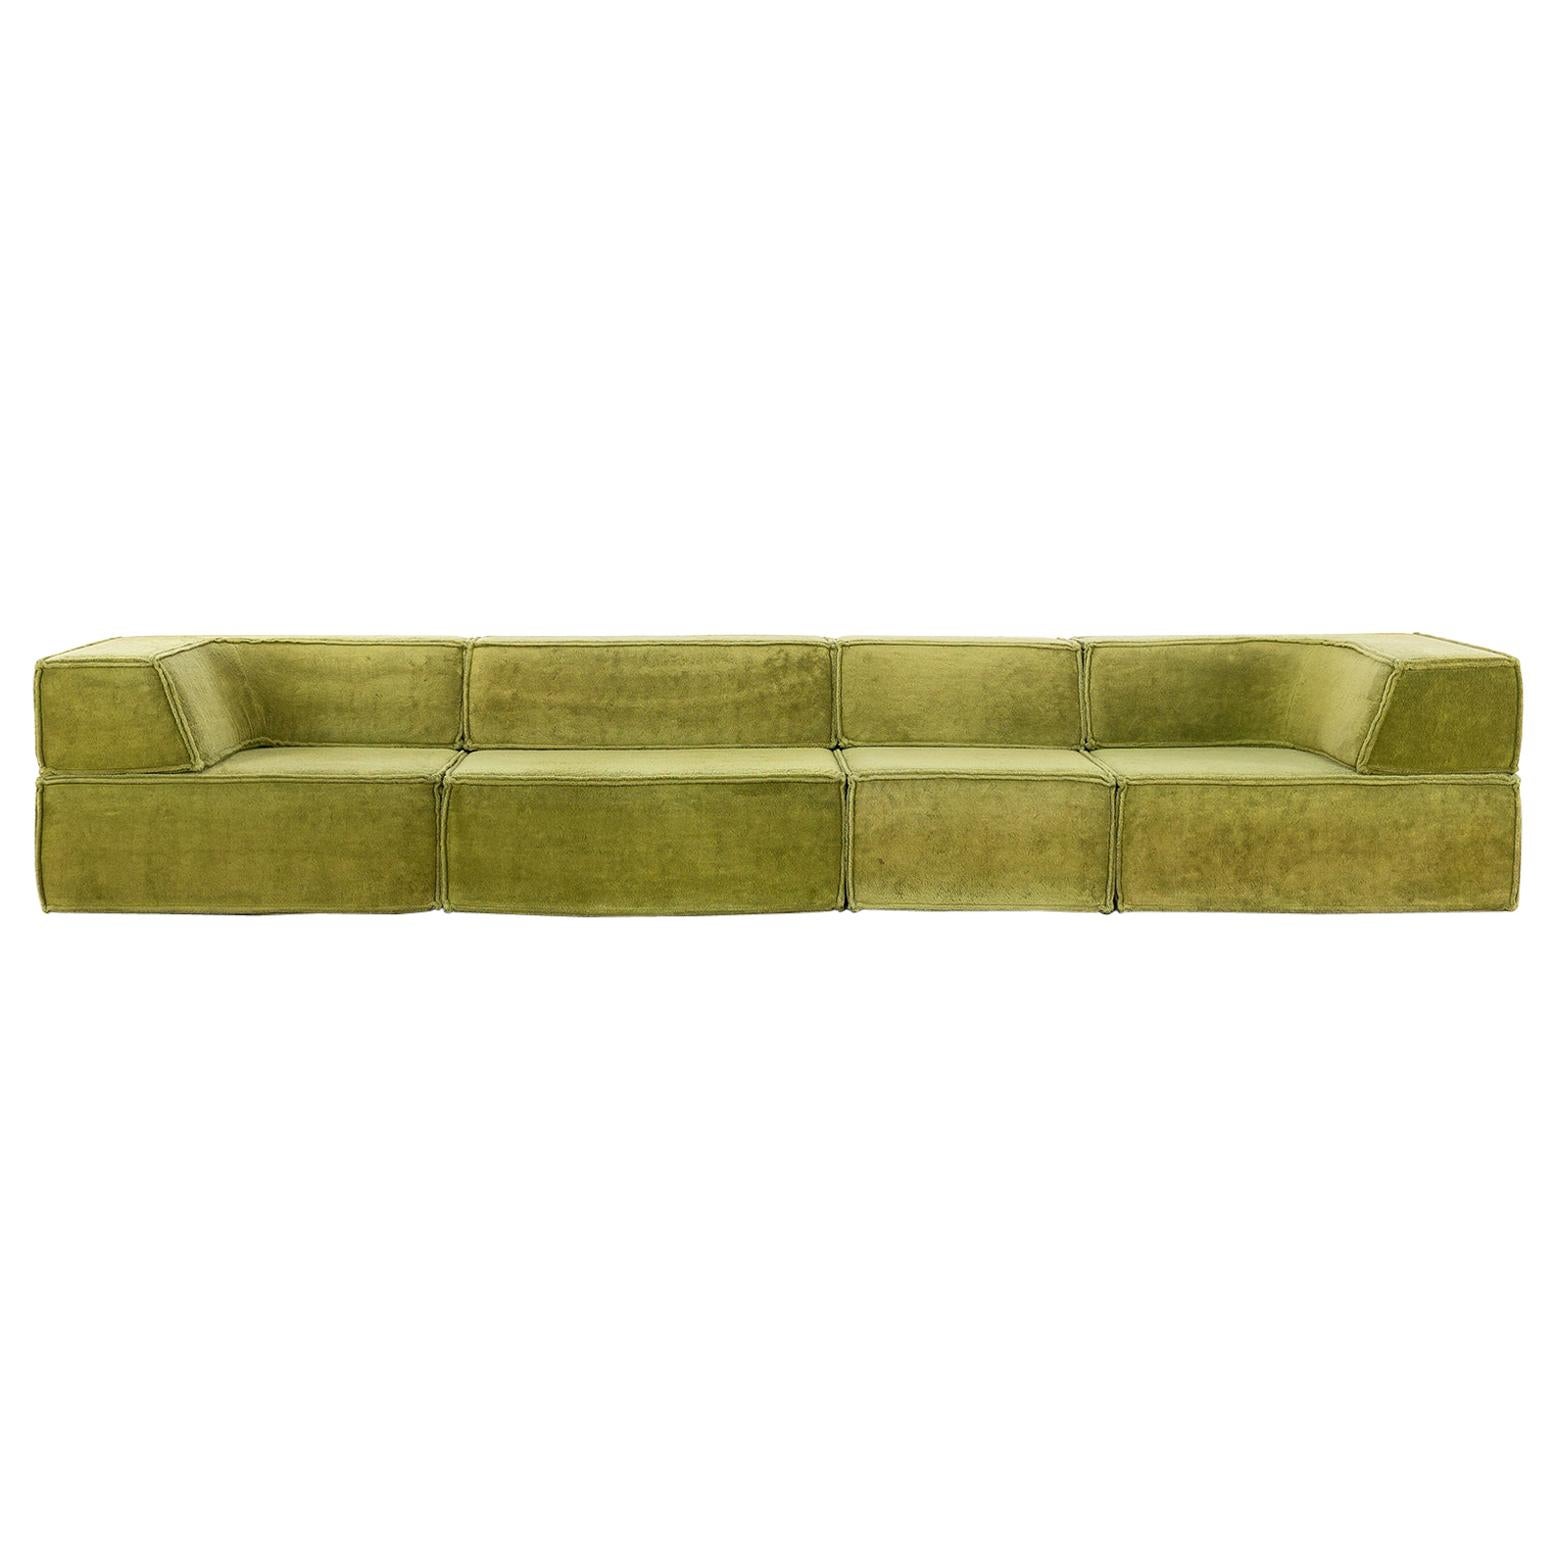 COR Trio Modular Sofa, Giant Landscape in Green, 1972 by Team Form Ag, Swiss